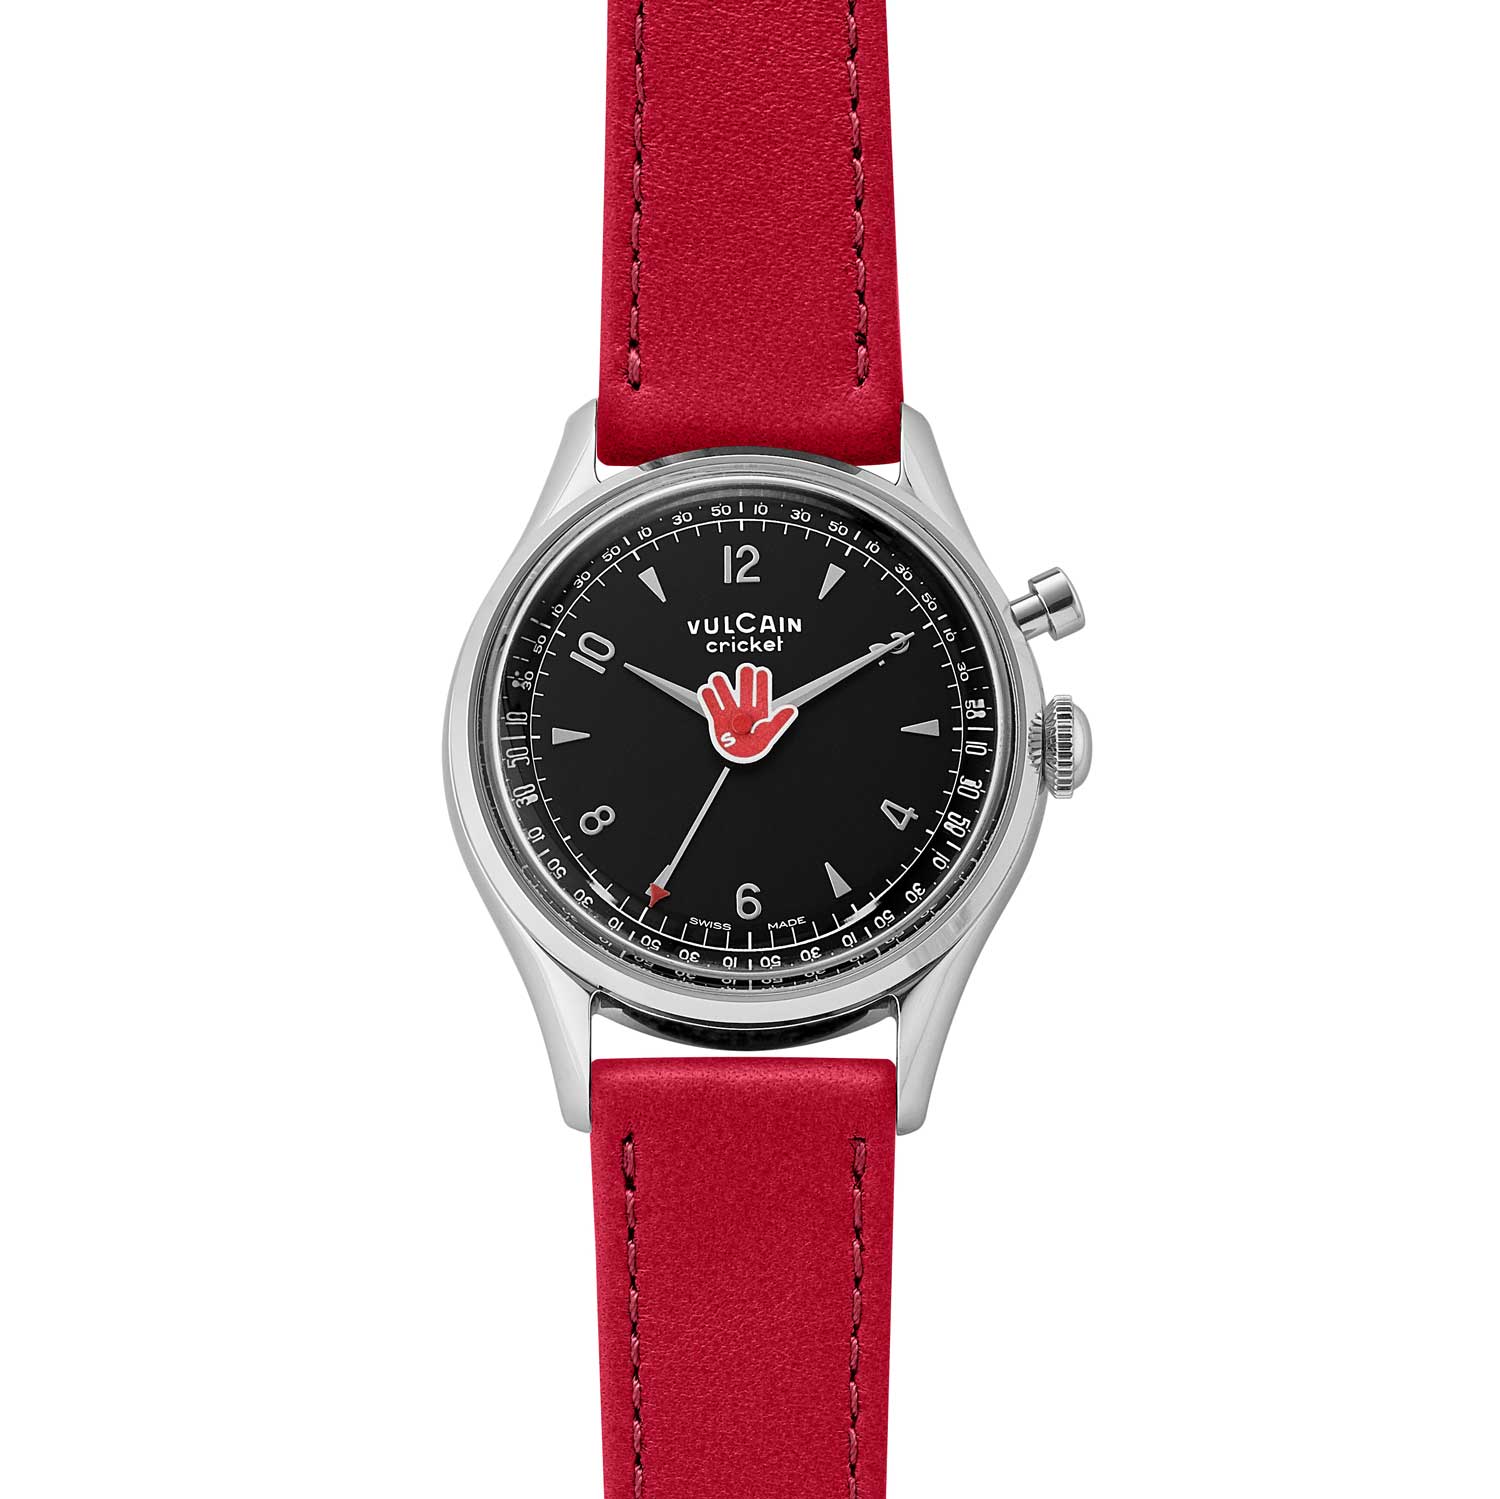 Vulcain × seconde/seconde/ × Revolution Cricket Tradition “Vulcan Salute” 39mm with red hand